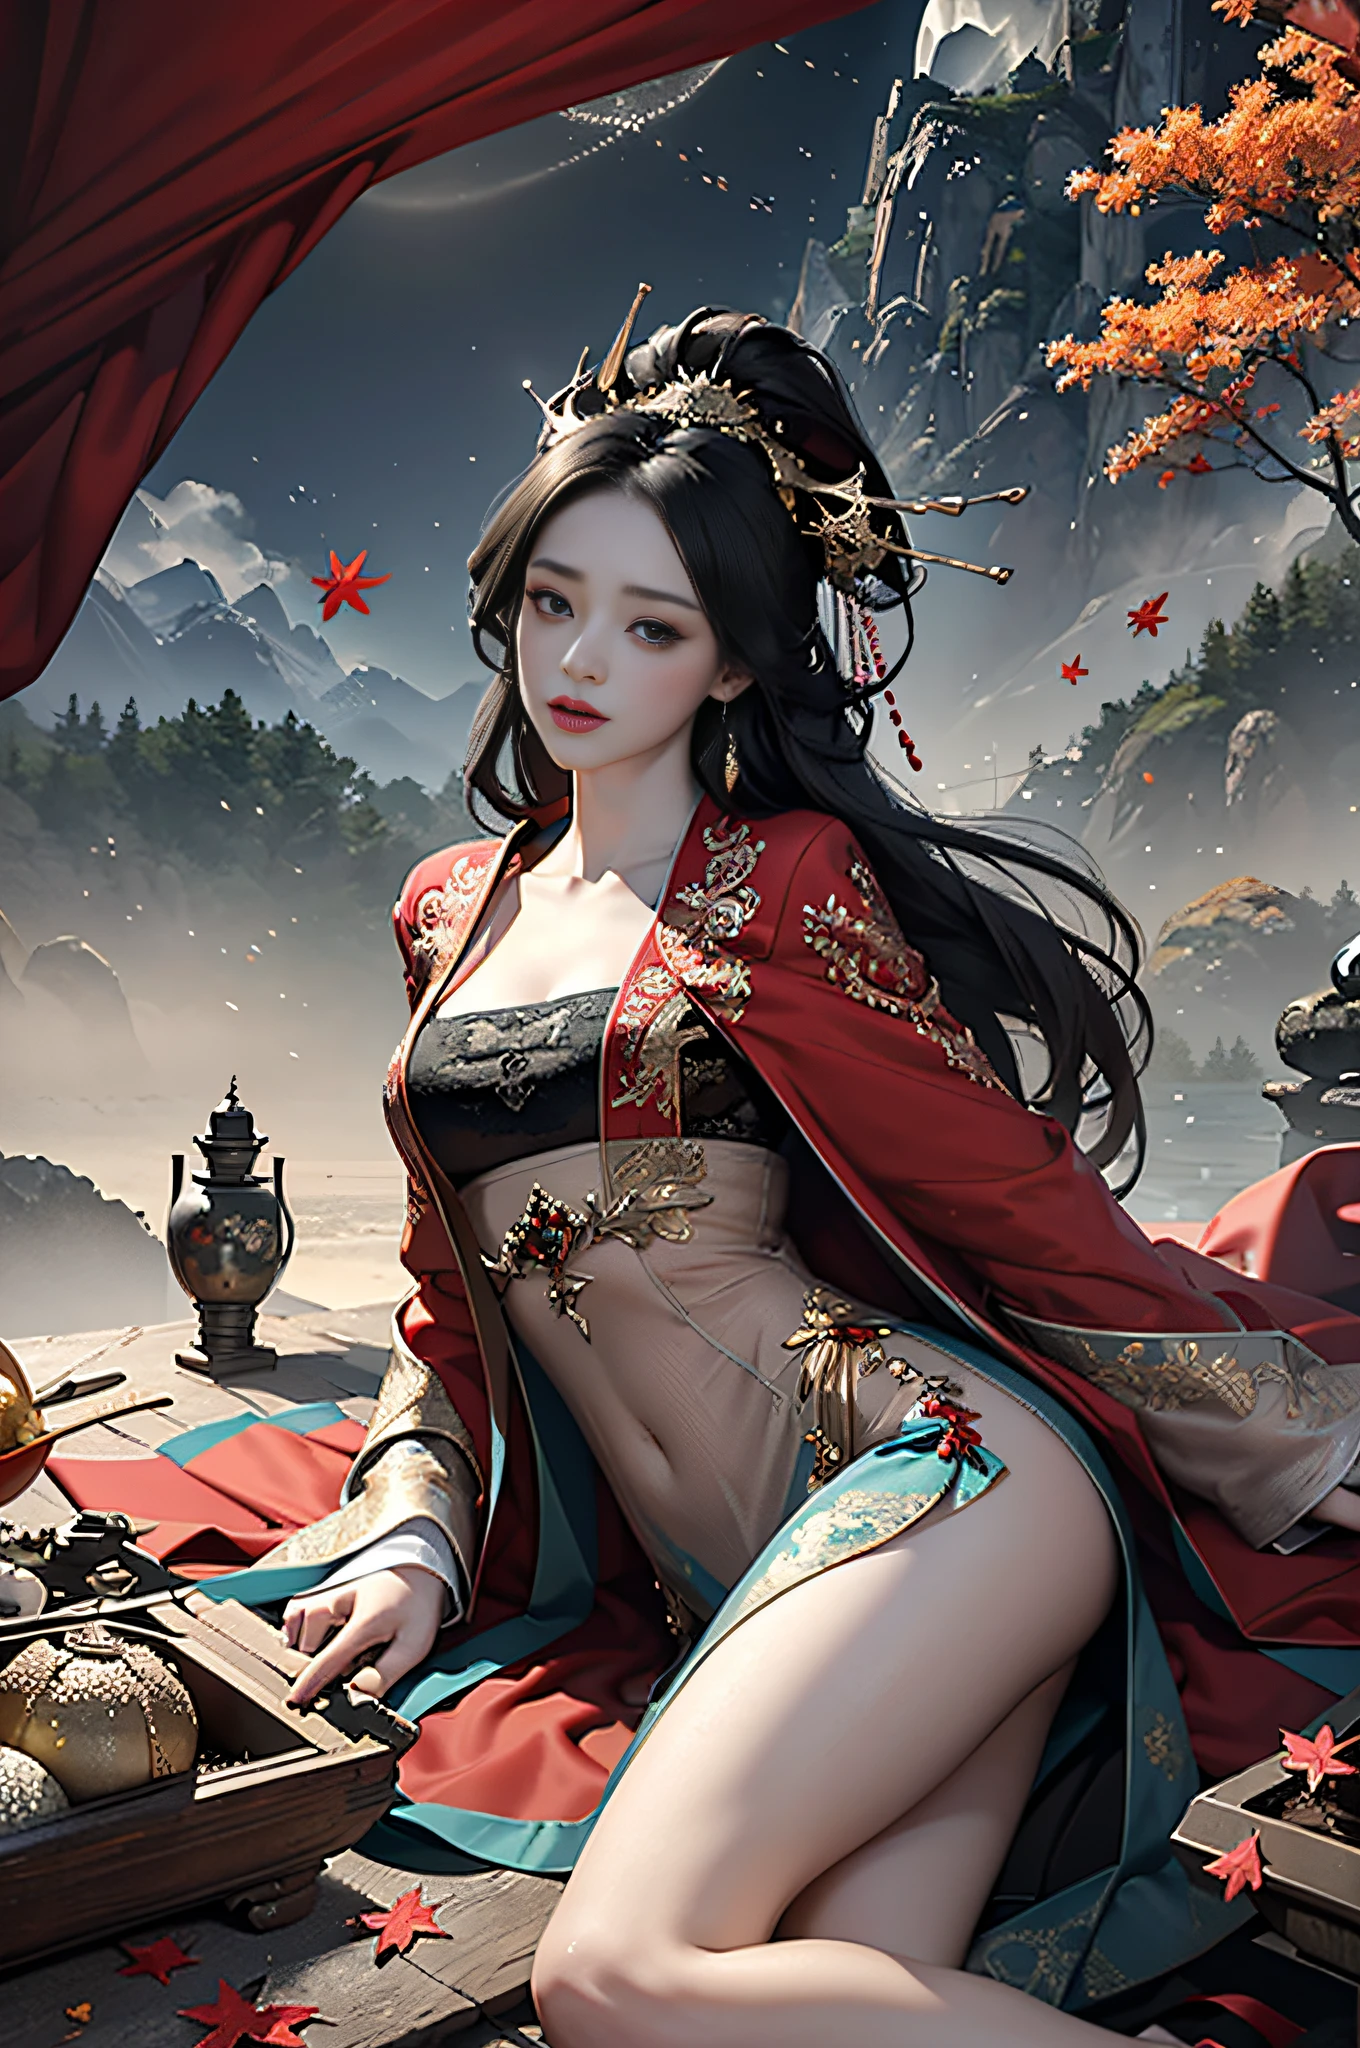 official art, Unity 8k wallpaper, super detailed, beautiful, beautiful, masterpiece, best quality, mystery, romanticism, horror, literature, art, fashion, tang dynasty era, decoration, intricate, embroidery, red hanfu, red tulle coat, 1 girl, black hair, red hair ornament, sad, fatalistic, bust composition, dramatic composition, movie lighting, dynamic perspective, sexy, full of seduction, maple forest, maple leaves falling, cloudy mist, dramatic composition,